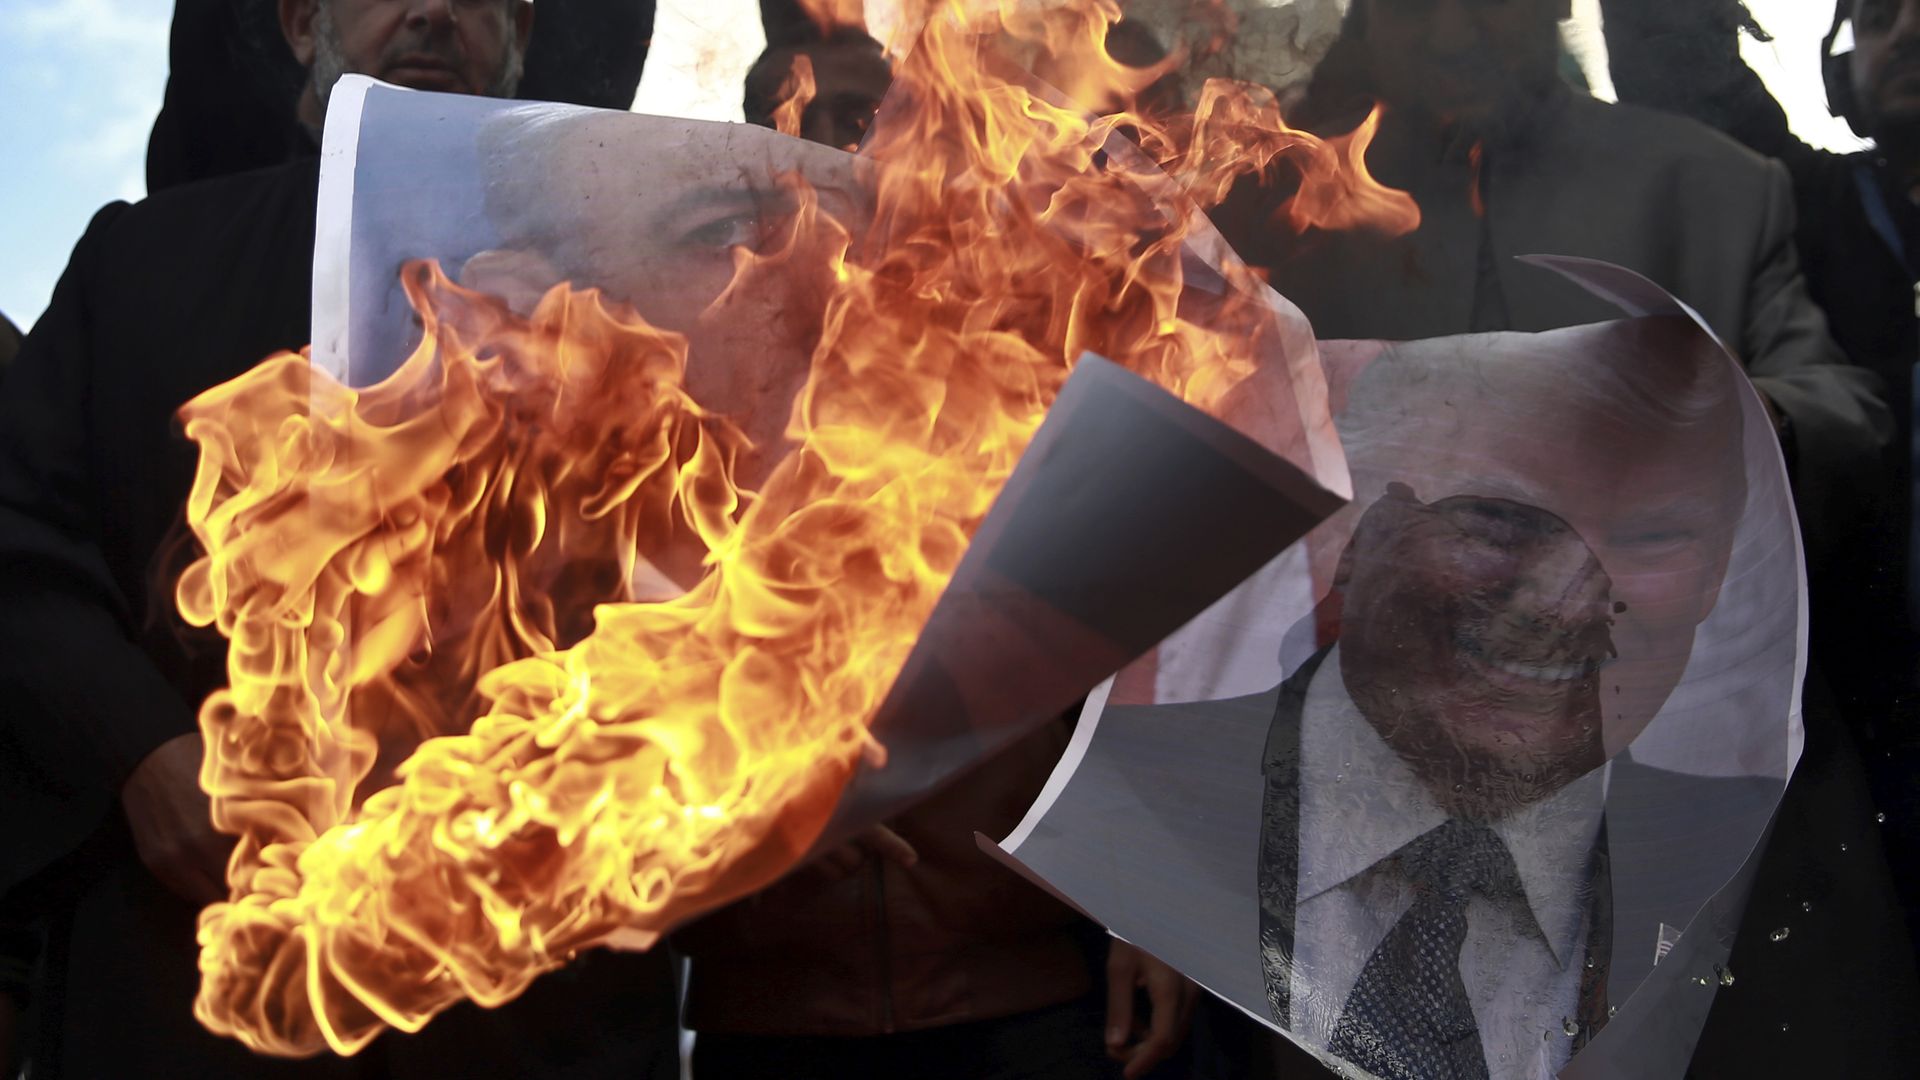 Palestinians burn pictures of Donald Trump and Israeli PM Netanyahu